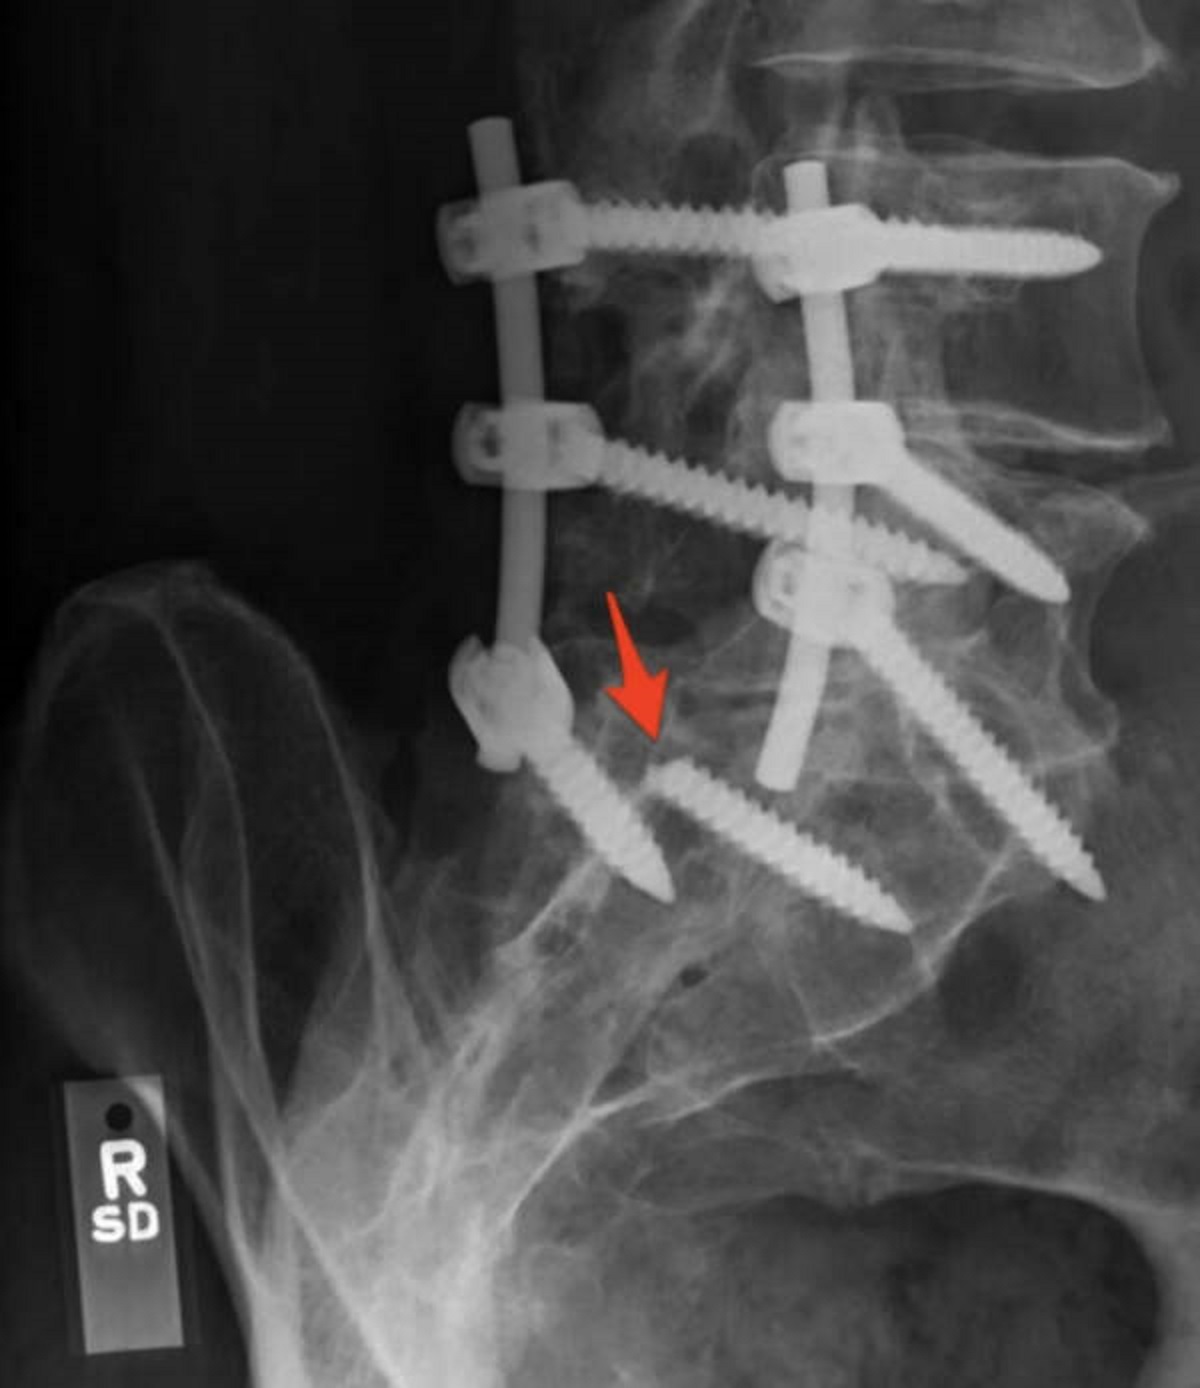 “One of the screws holding my spine in place snapped”